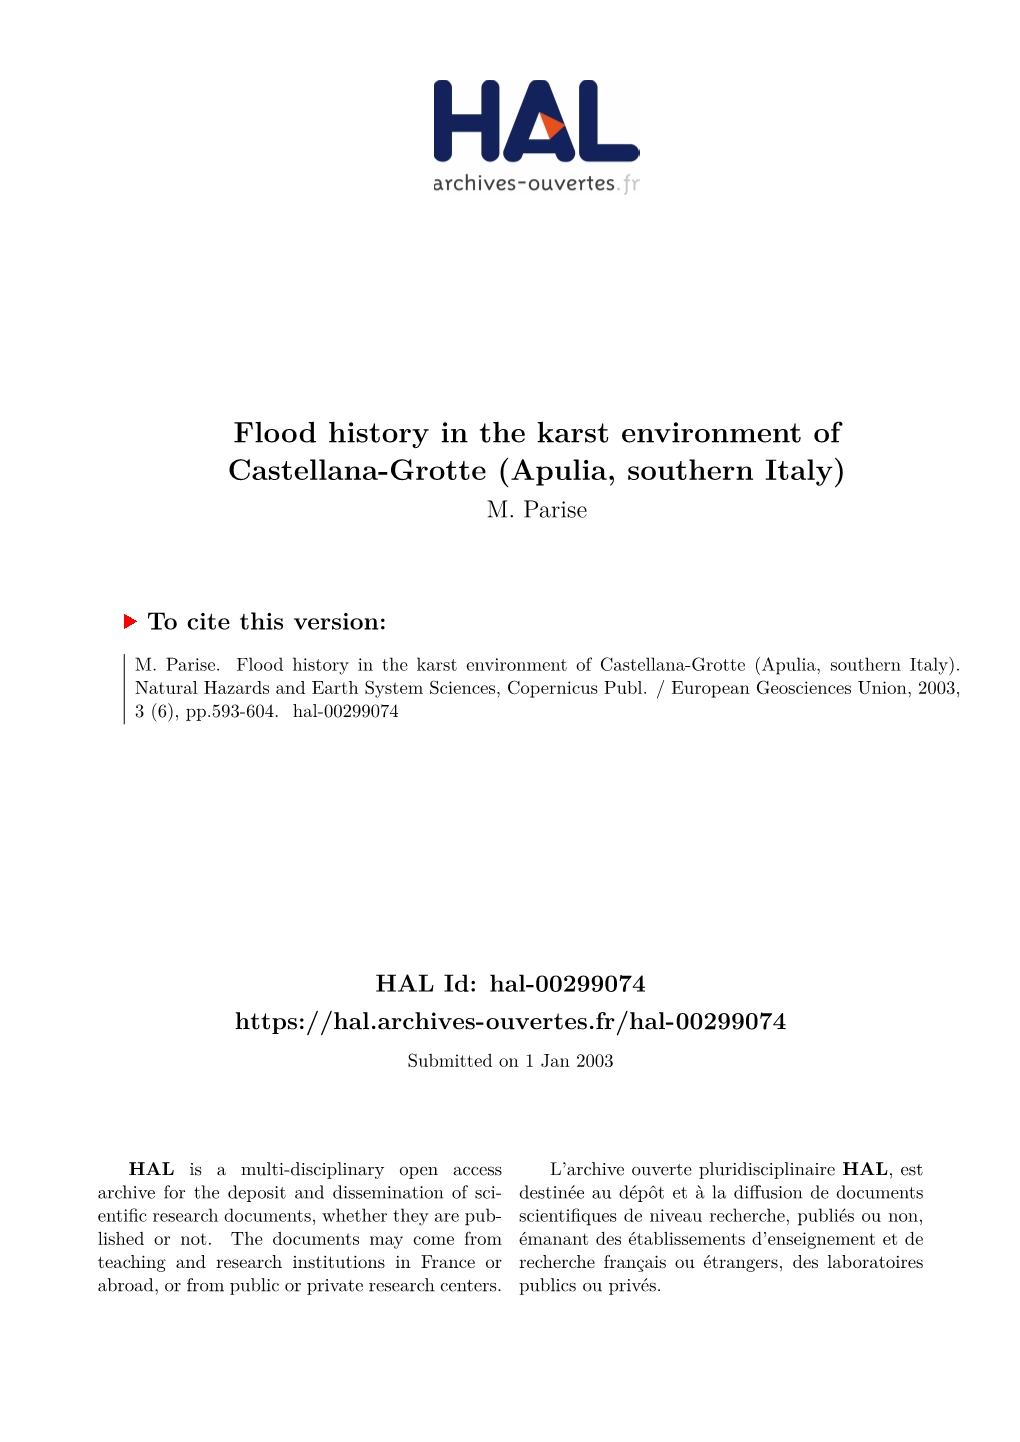 Flood History in the Karst Environment of Castellana-Grotte (Apulia, Southern Italy) M